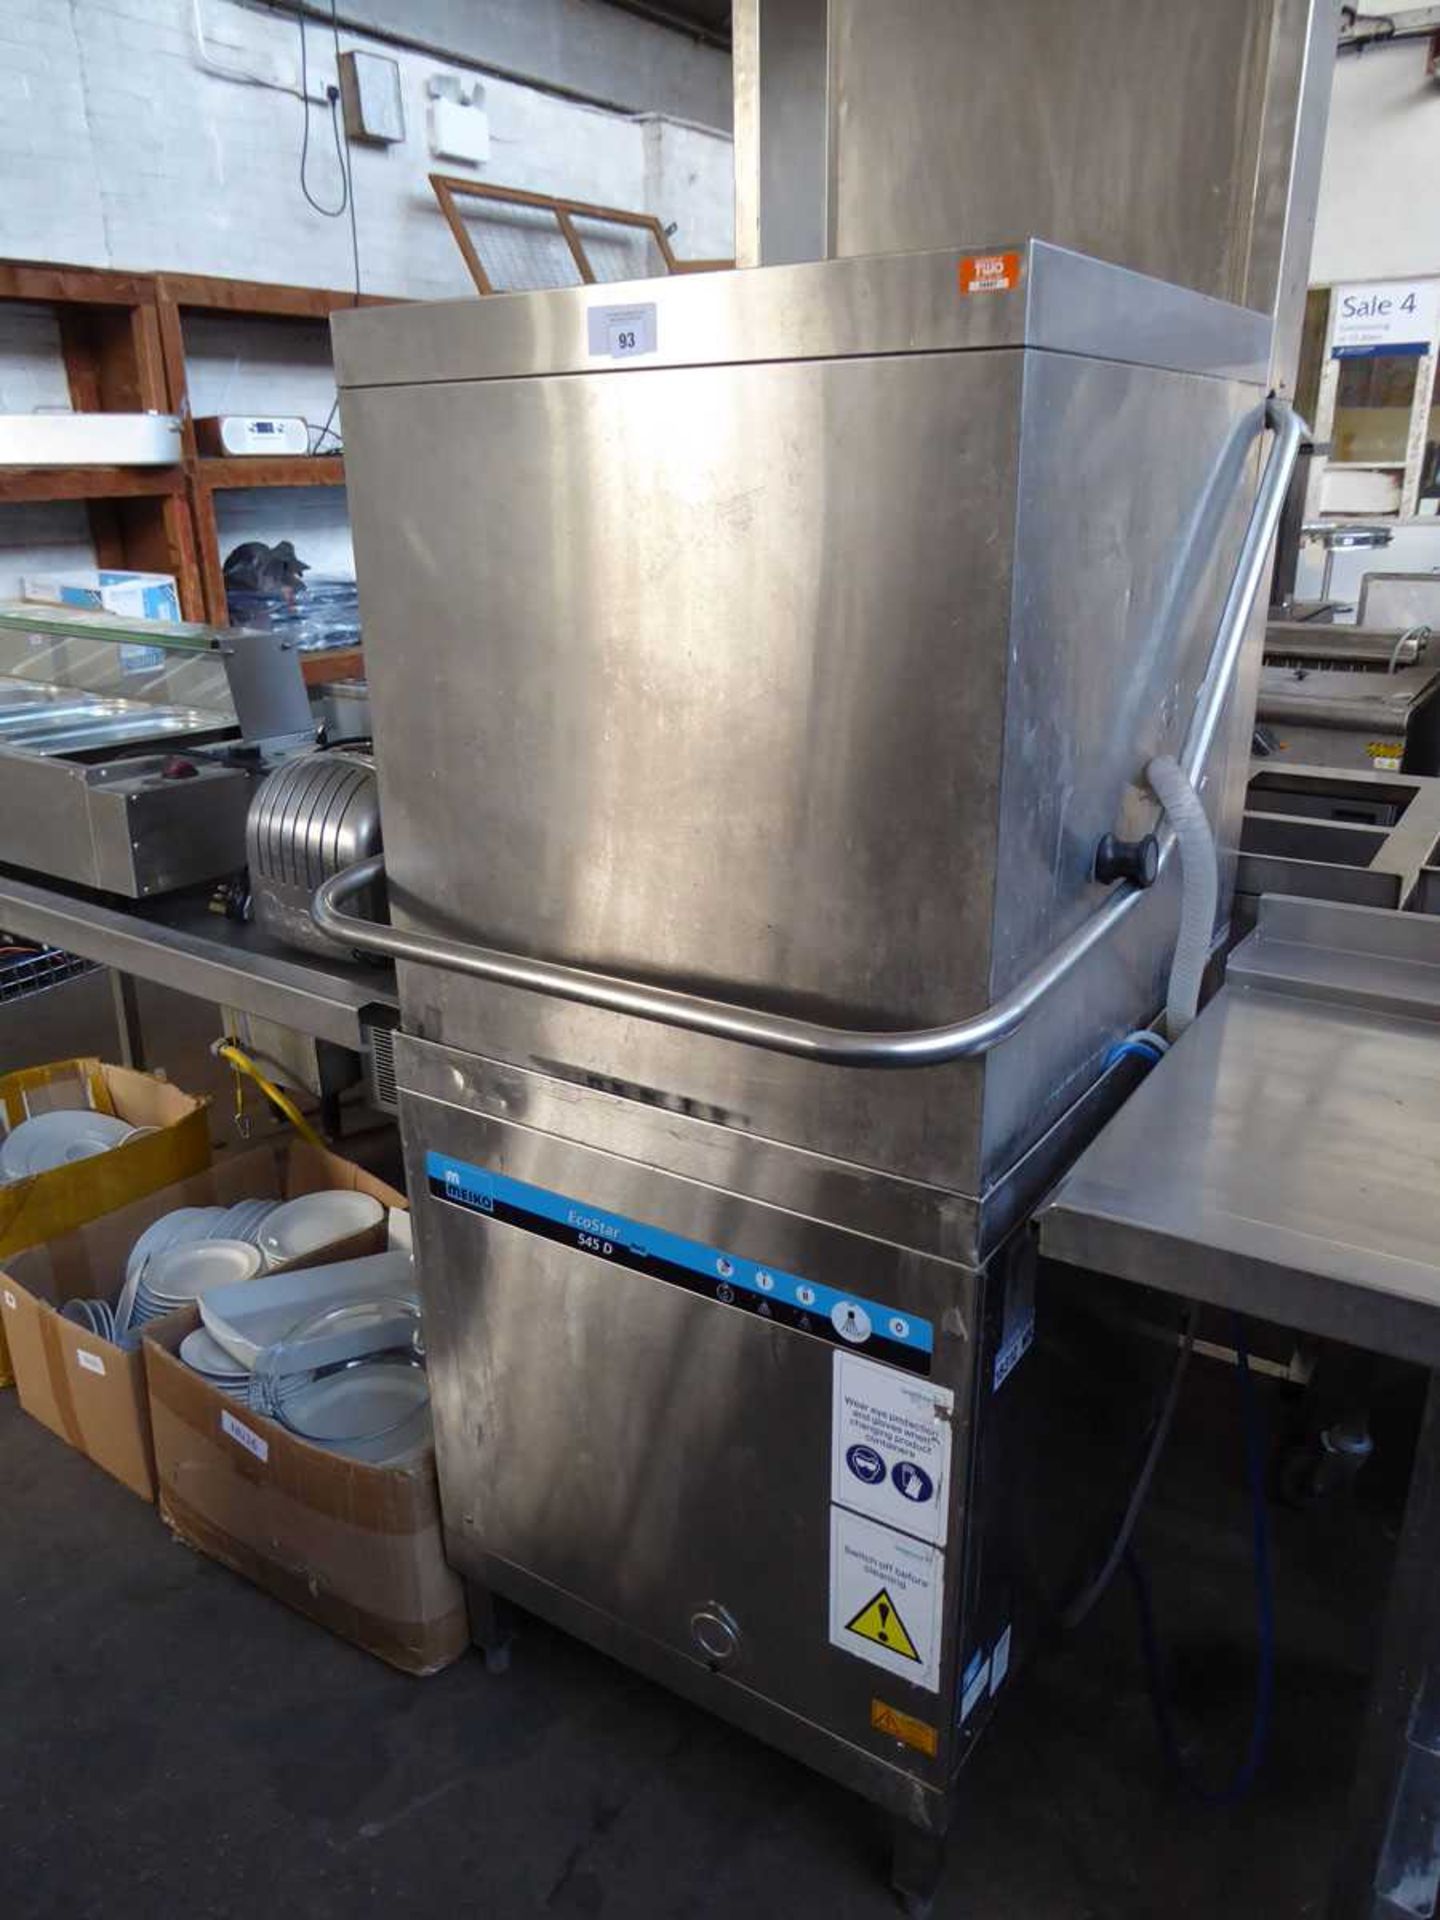 +VAT 62cm Meiko model Ecostar 545D lift top pass through dishwasher with integrated extractor unit - Image 2 of 6